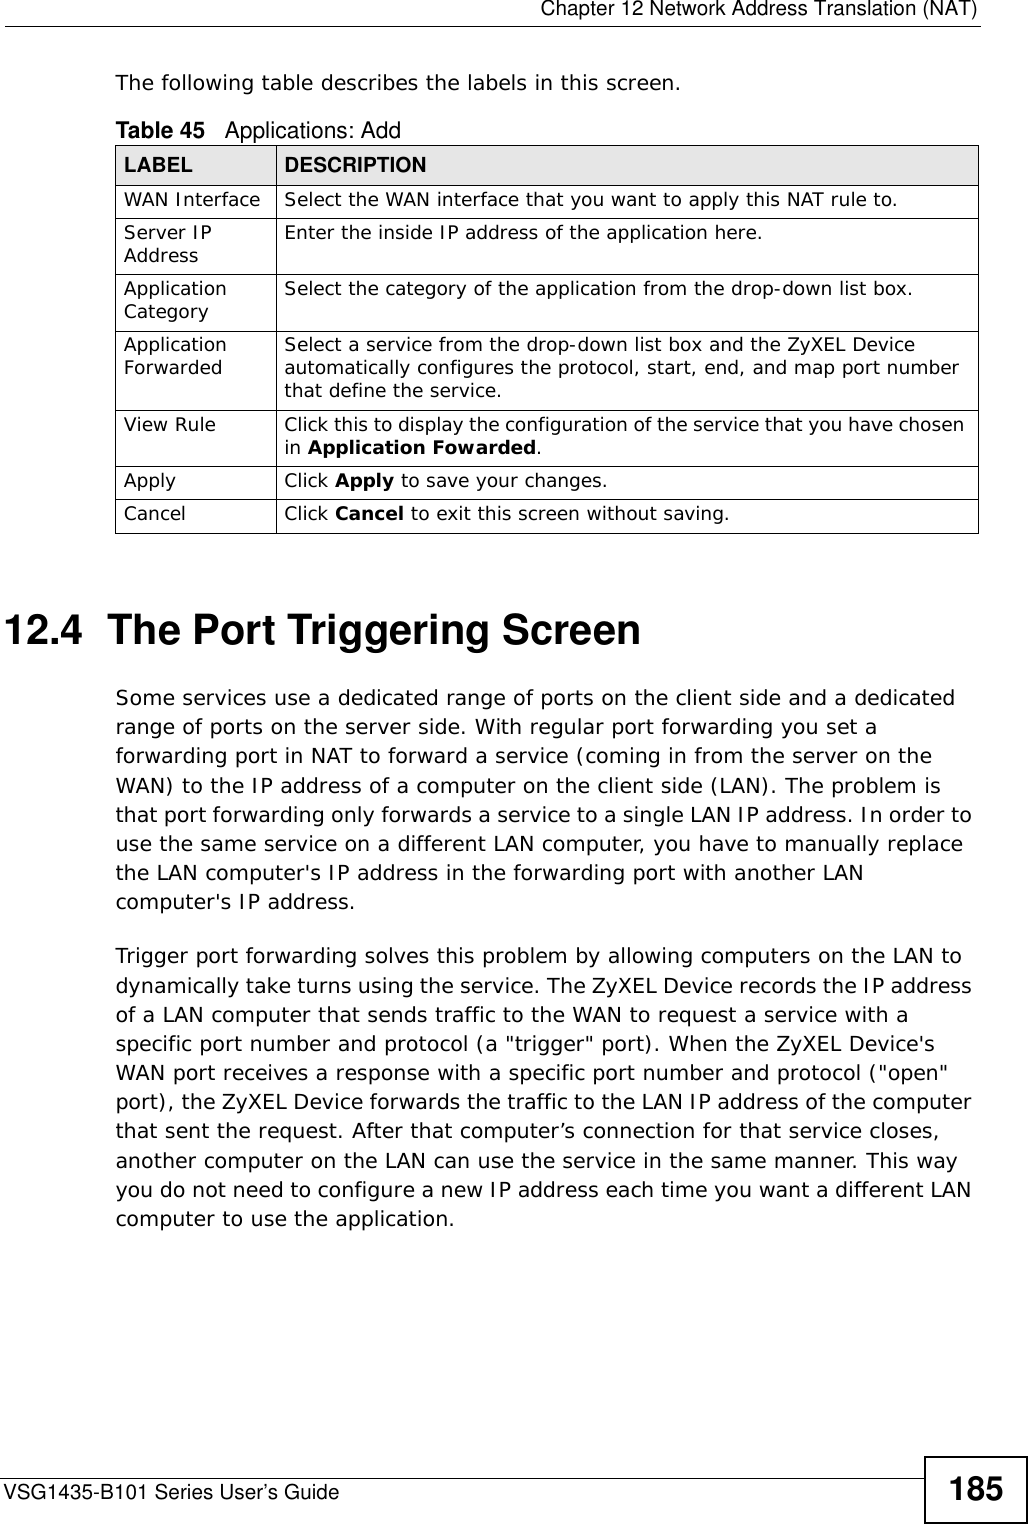  Chapter 12 Network Address Translation (NAT)VSG1435-B101 Series User’s Guide 185The following table describes the labels in this screen. 12.4  The Port Triggering ScreenSome services use a dedicated range of ports on the client side and a dedicated range of ports on the server side. With regular port forwarding you set a forwarding port in NAT to forward a service (coming in from the server on the WAN) to the IP address of a computer on the client side (LAN). The problem is that port forwarding only forwards a service to a single LAN IP address. In order to use the same service on a different LAN computer, you have to manually replace the LAN computer&apos;s IP address in the forwarding port with another LAN computer&apos;s IP address. Trigger port forwarding solves this problem by allowing computers on the LAN to dynamically take turns using the service. The ZyXEL Device records the IP address of a LAN computer that sends traffic to the WAN to request a service with a specific port number and protocol (a &quot;trigger&quot; port). When the ZyXEL Device&apos;s WAN port receives a response with a specific port number and protocol (&quot;open&quot; port), the ZyXEL Device forwards the traffic to the LAN IP address of the computer that sent the request. After that computer’s connection for that service closes, another computer on the LAN can use the service in the same manner. This way you do not need to configure a new IP address each time you want a different LAN computer to use the application.Table 45   Applications: AddLABEL DESCRIPTIONWAN Interface Select the WAN interface that you want to apply this NAT rule to.Server IP Address Enter the inside IP address of the application here.Application Category Select the category of the application from the drop-down list box.Application Forwarded Select a service from the drop-down list box and the ZyXEL Device automatically configures the protocol, start, end, and map port number that define the service.View Rule Click this to display the configuration of the service that you have chosen in Application Fowarded.Apply Click Apply to save your changes.Cancel Click Cancel to exit this screen without saving.